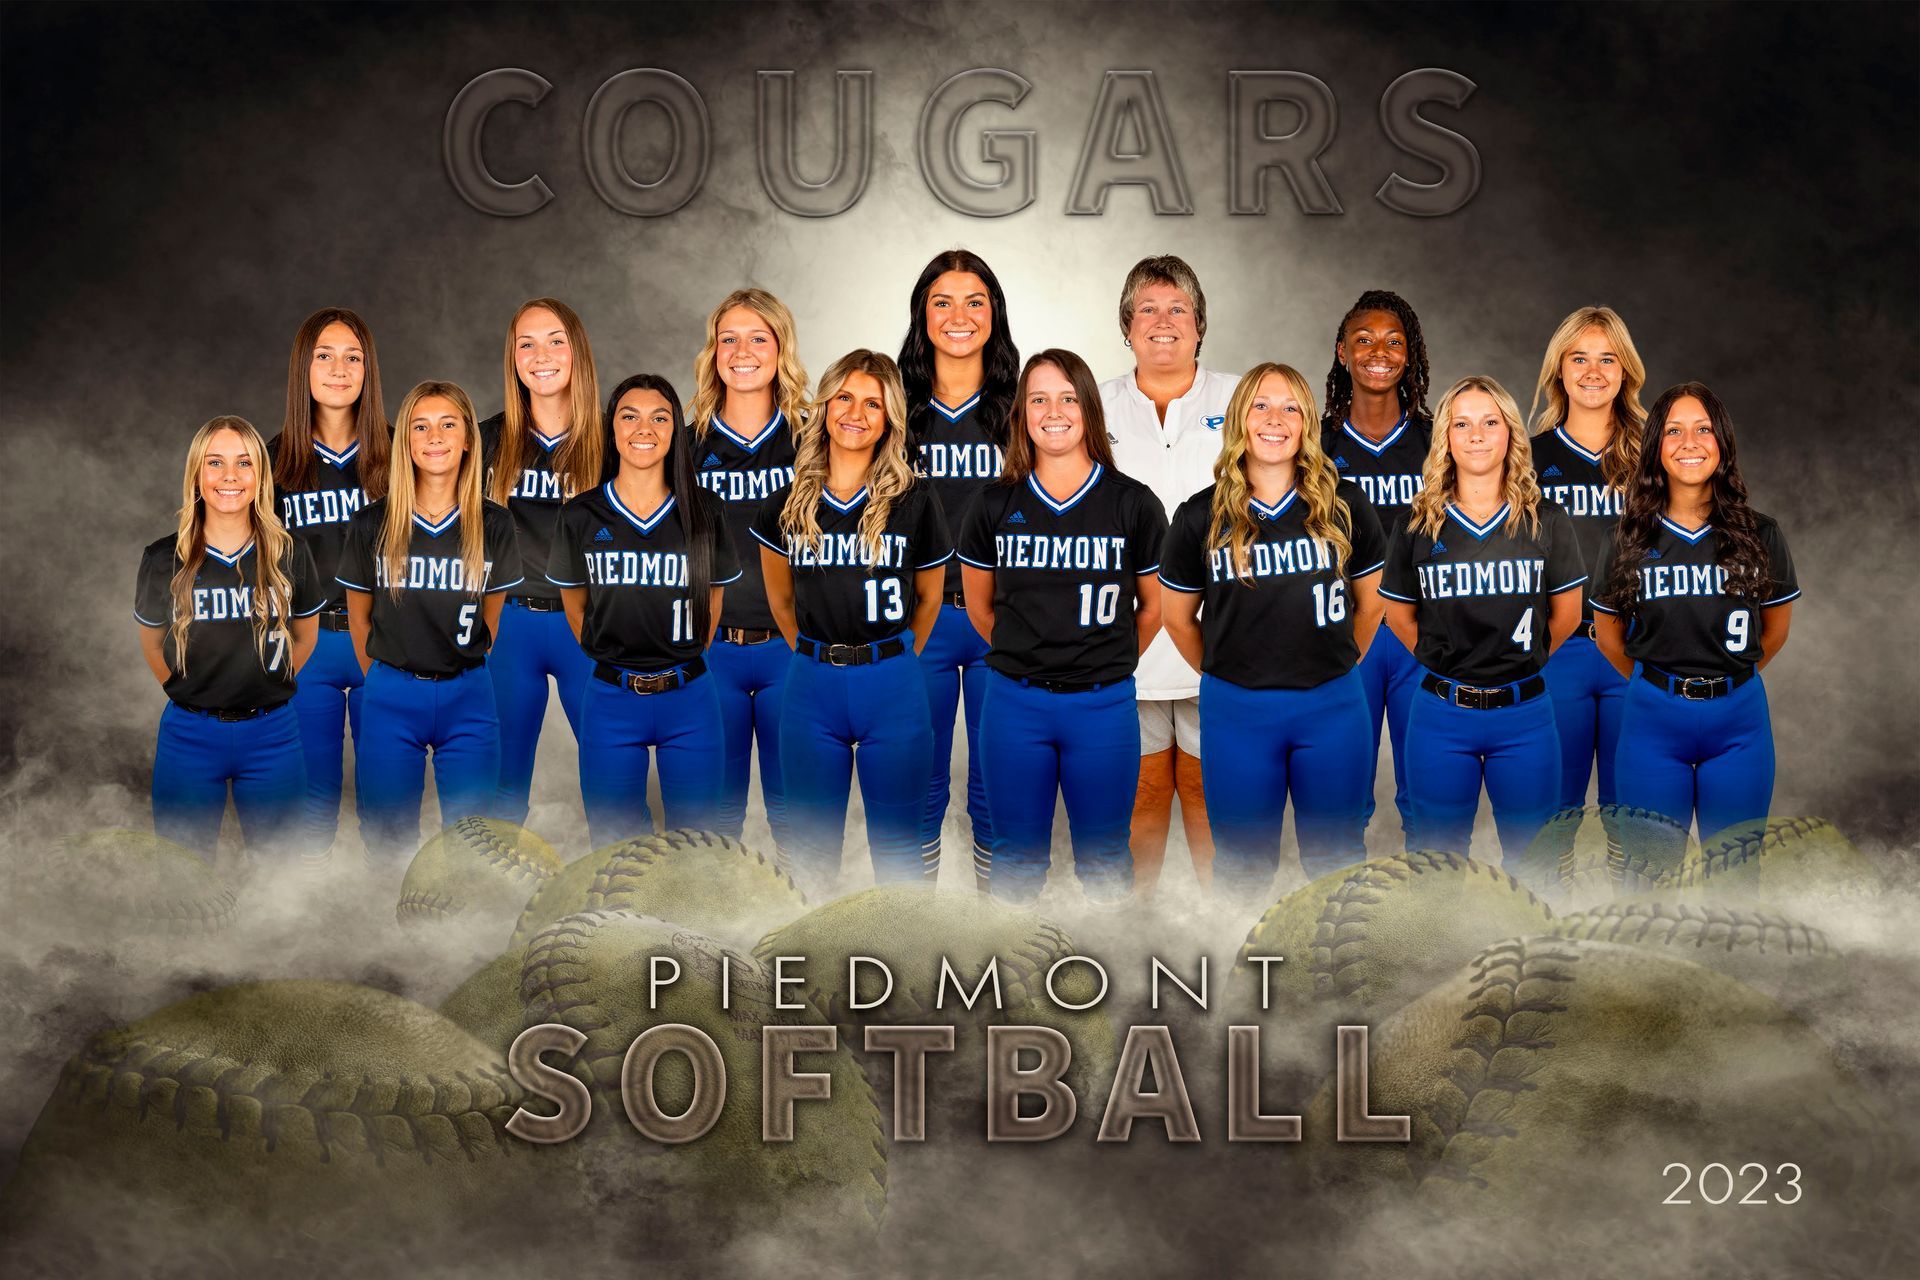 the piedmont softball team is posing for a team photo .